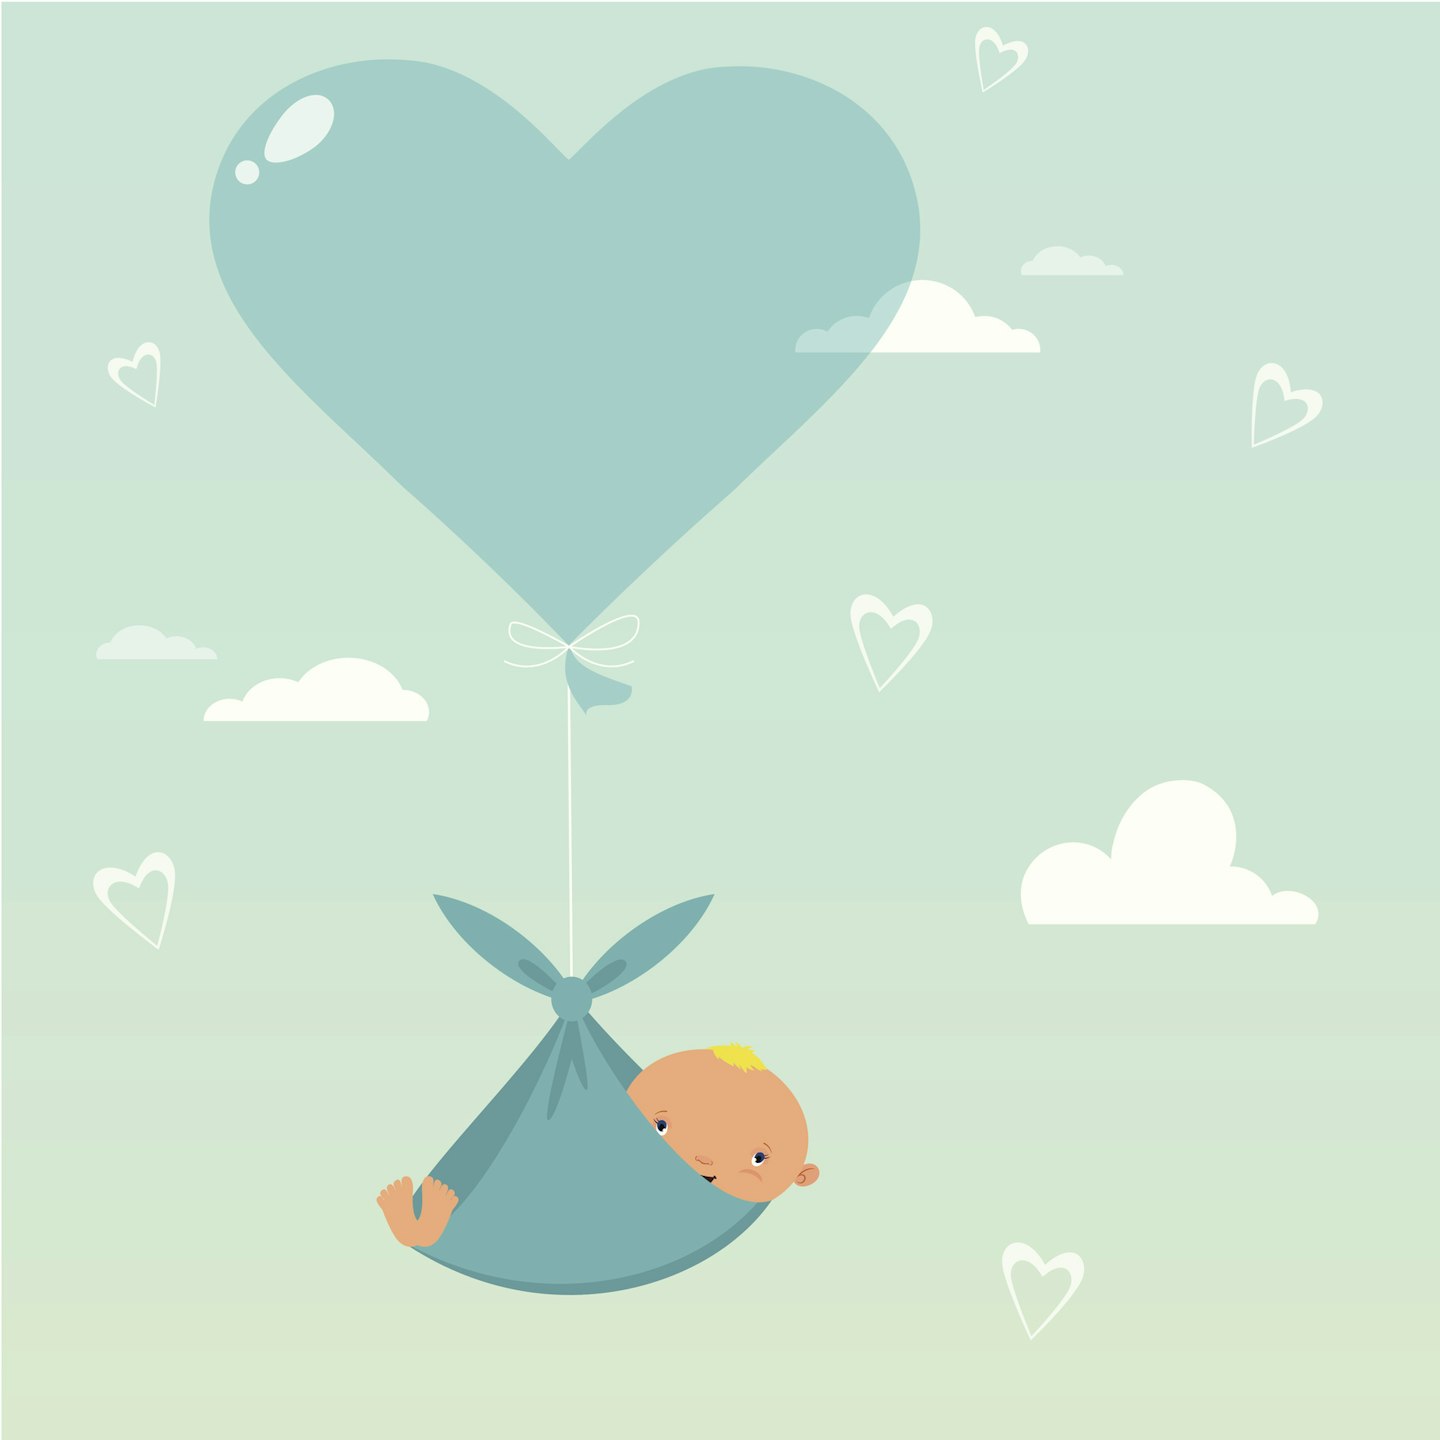 Baby hanging in a sling from a blue heart balloon